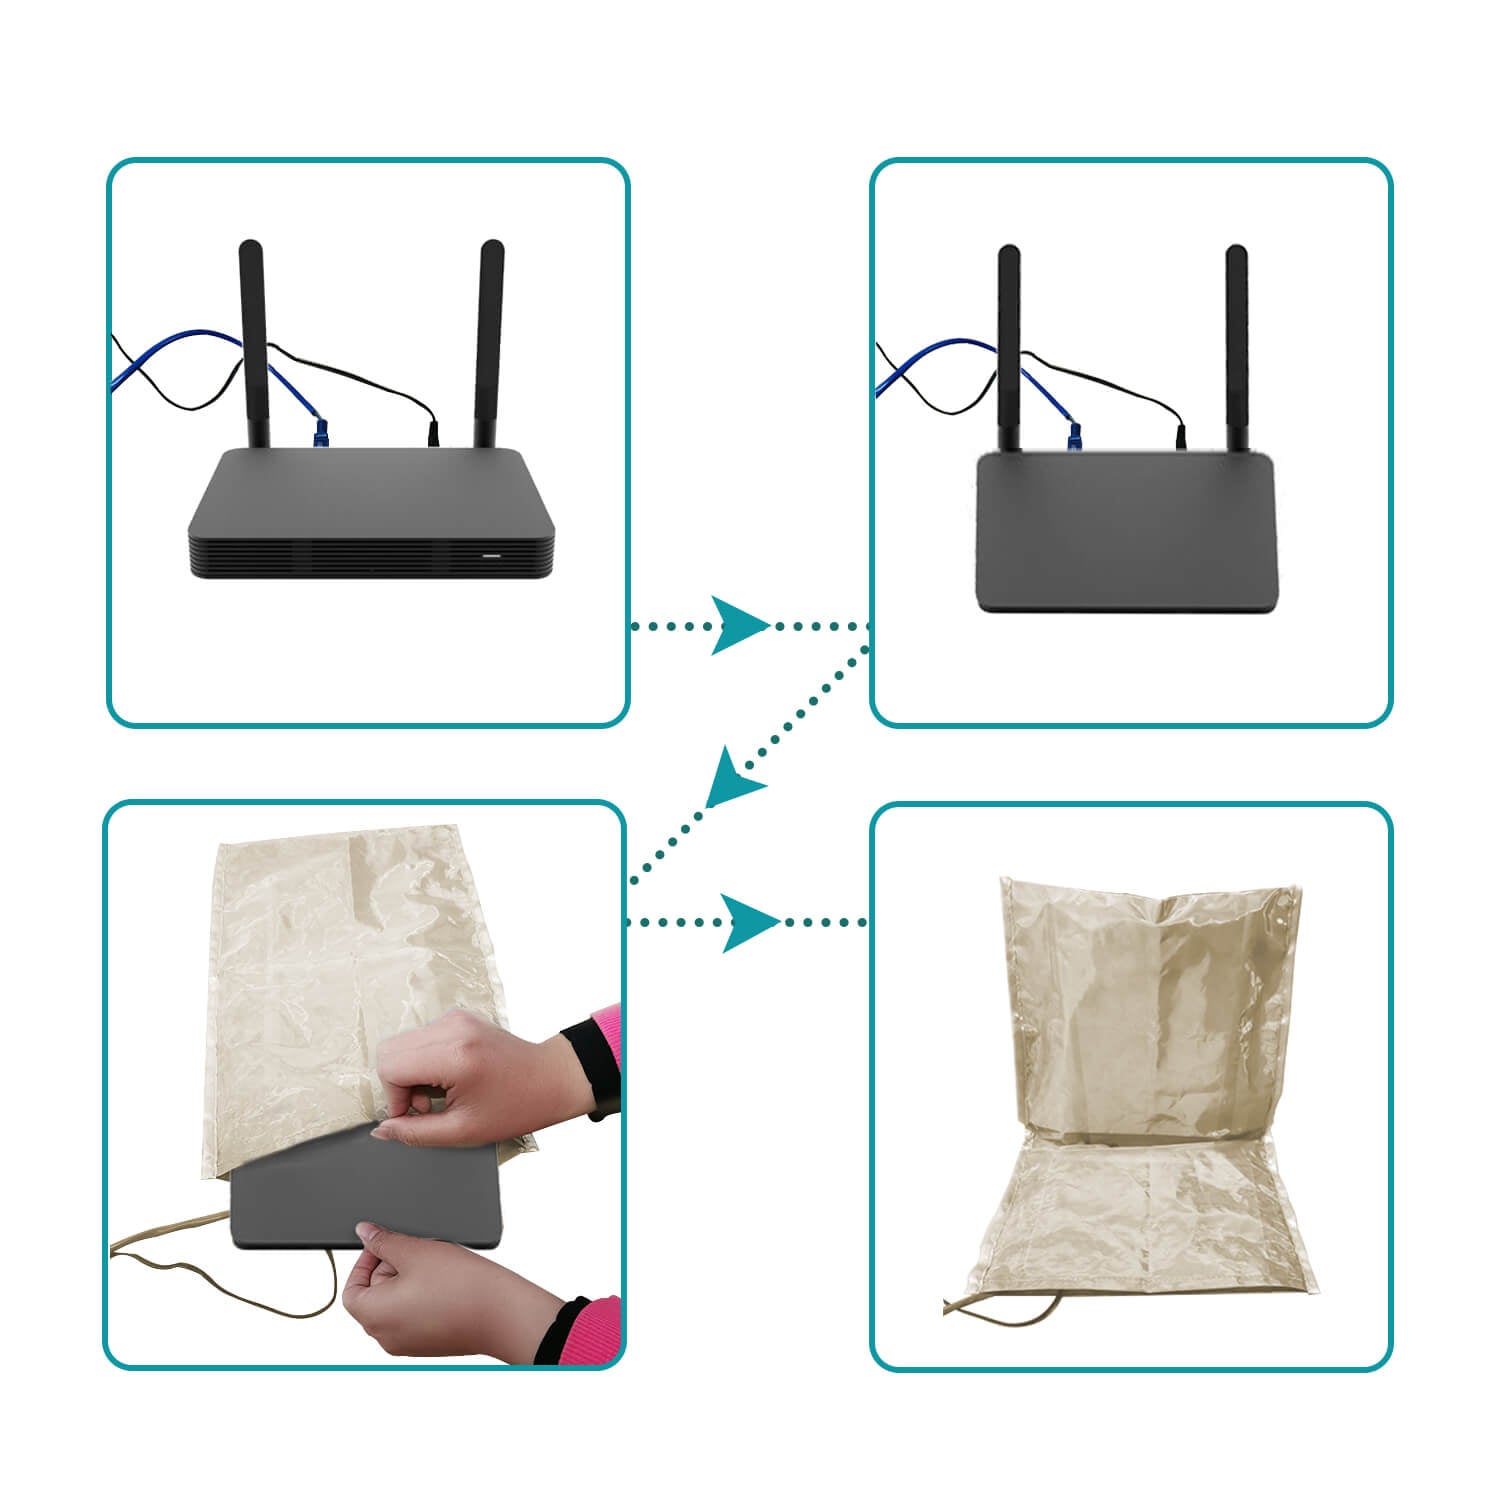 LARGE 35cm X 40cm Universal WiFi Router Signal Tamer - Effectively Reduces Radiation and EMF Emissions - GroundedKiwi.nz